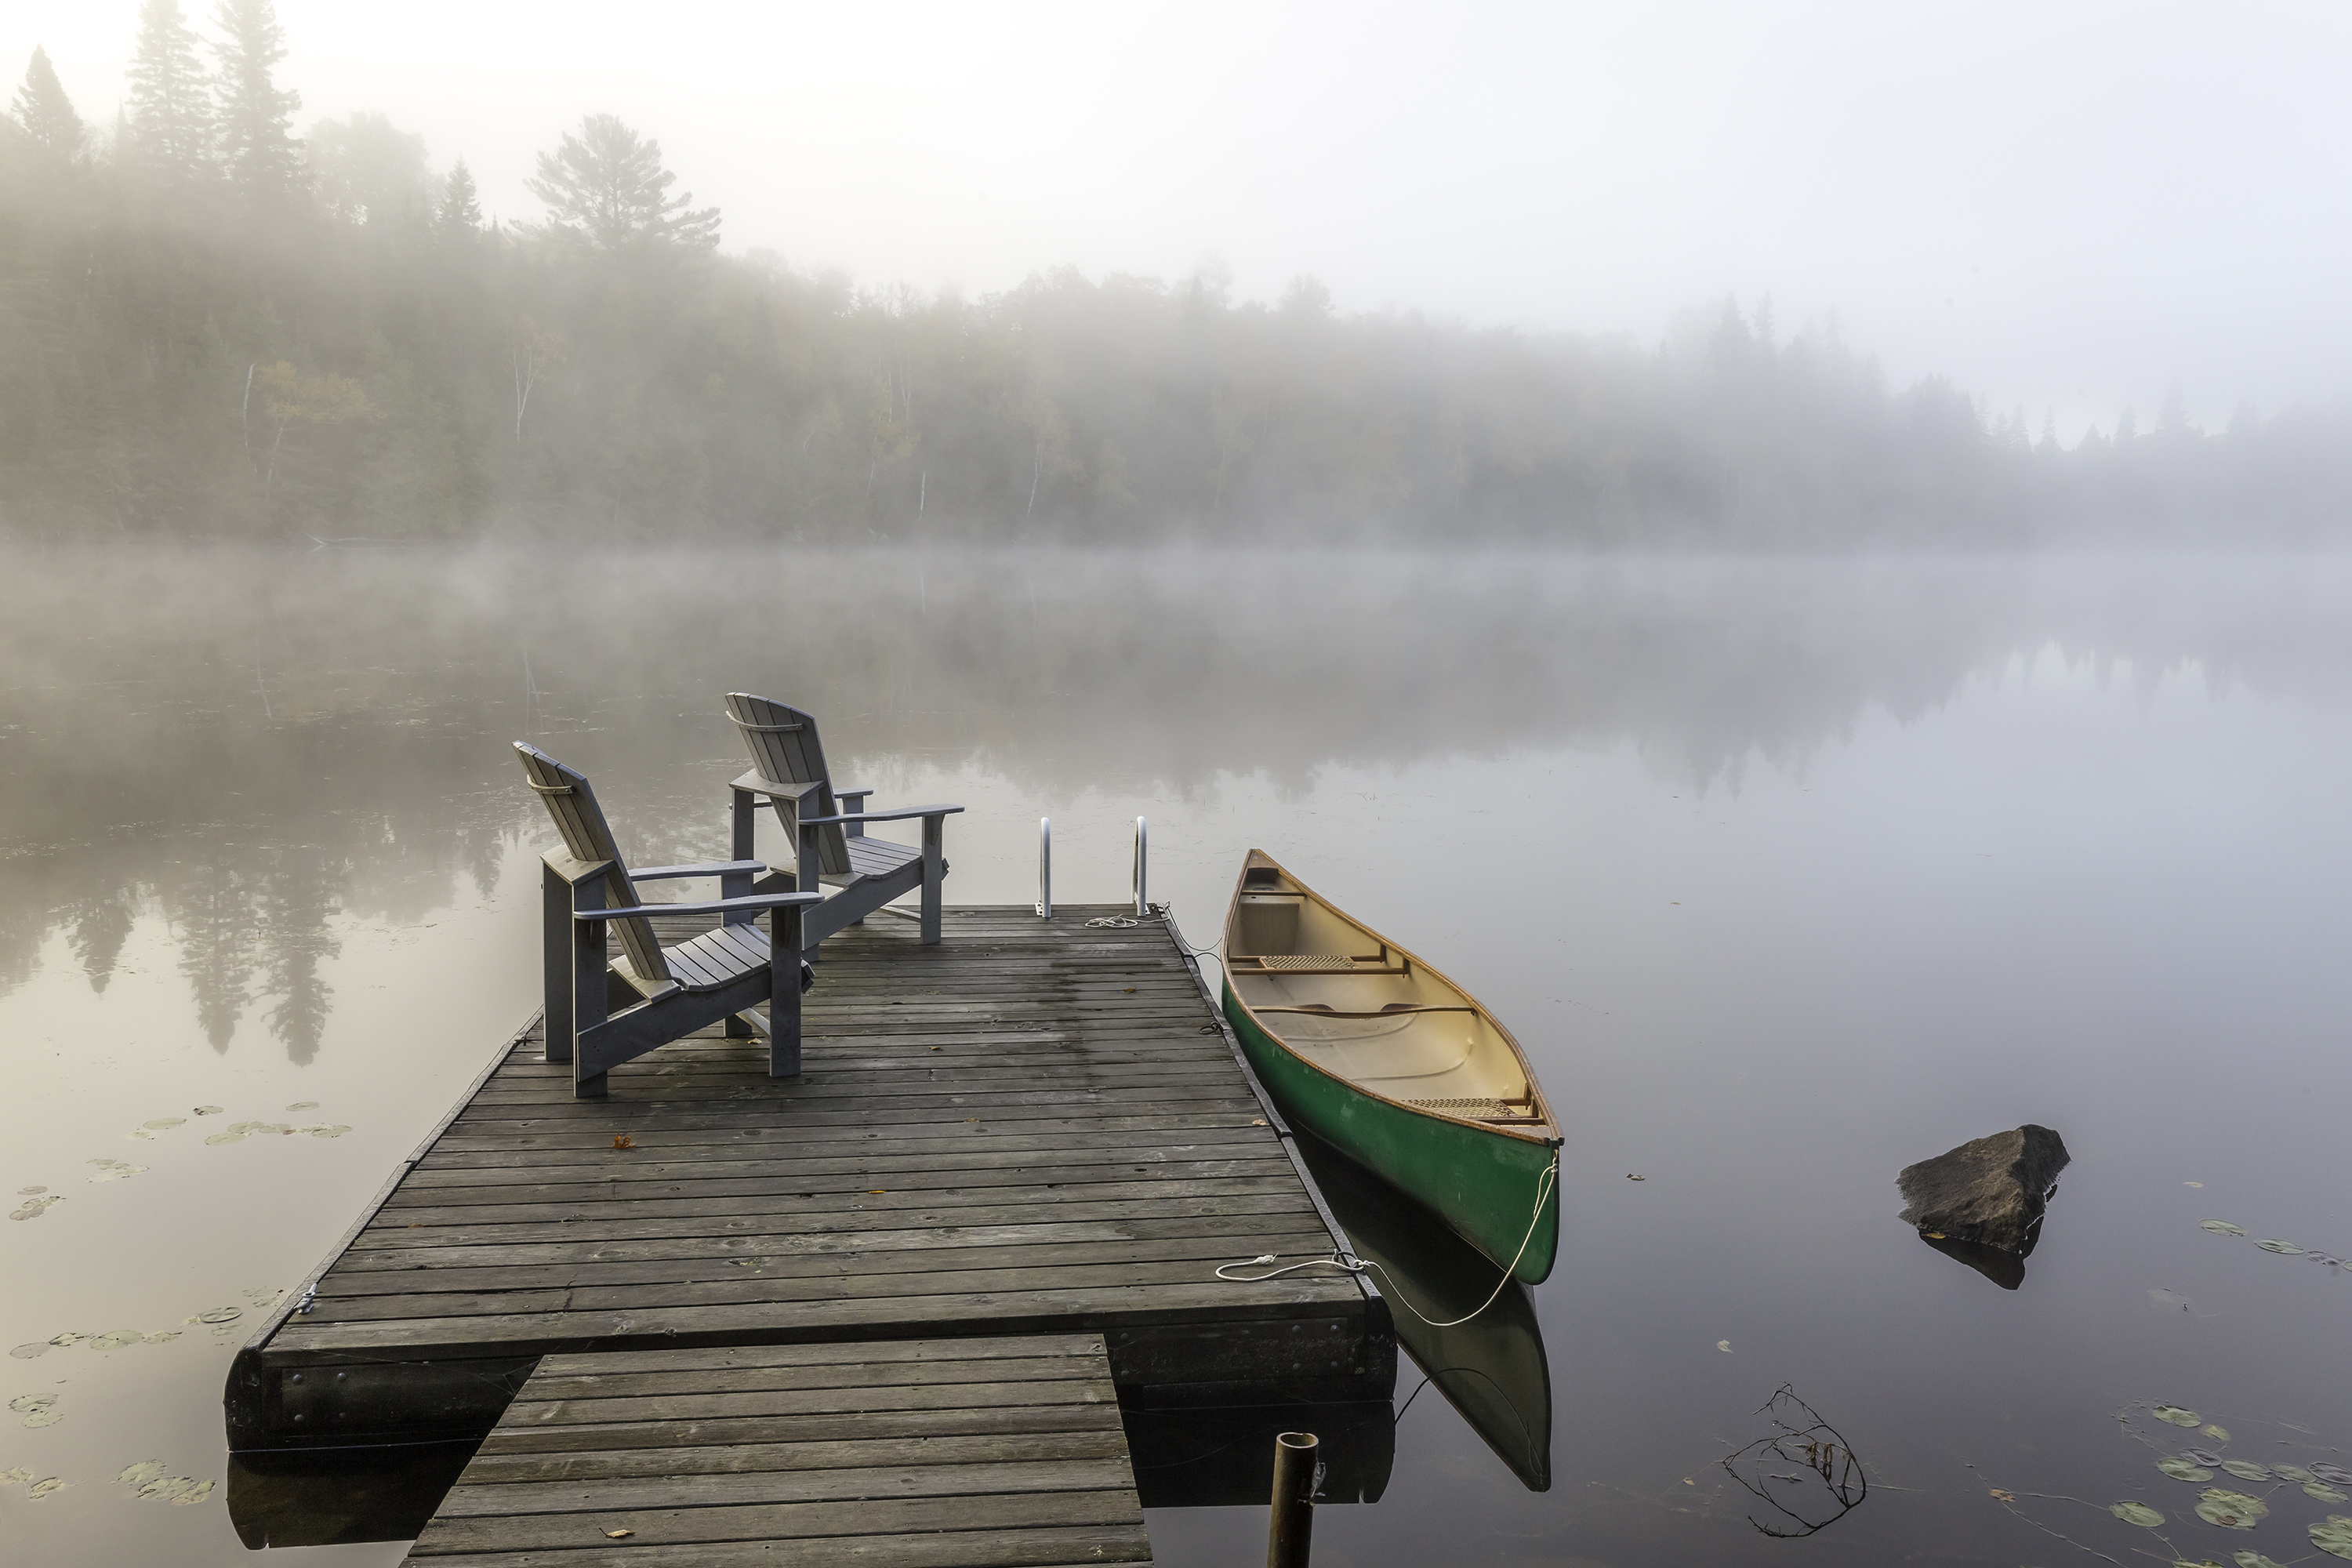 Green Canoe and Dock on a Misty Morning